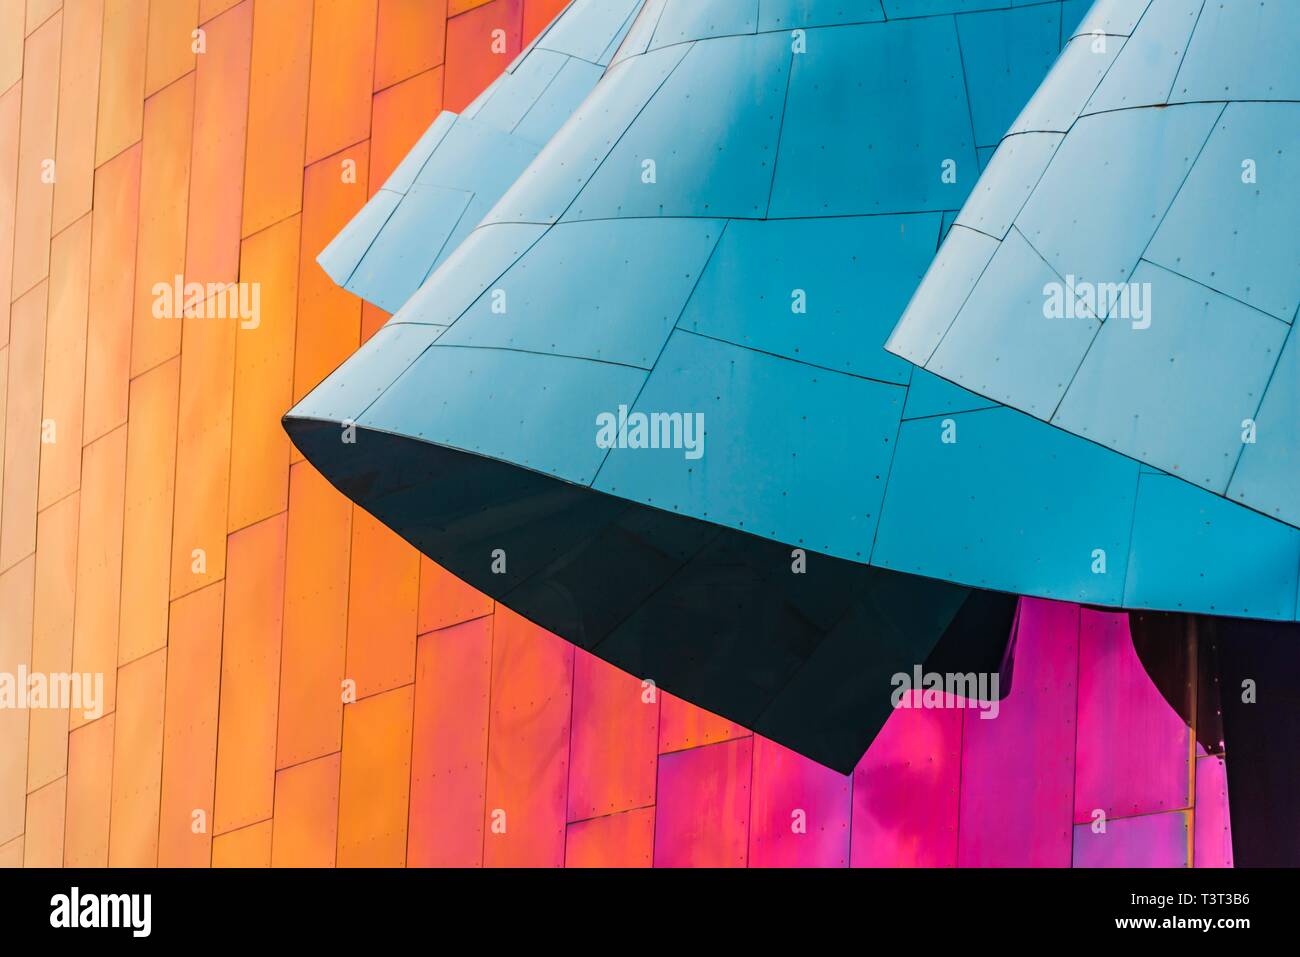 Curved colored facade of the Museum of Pop Culture, MoPOP, detail, architect Frank Gehry, Seattle, Washington, USA Stock Photo